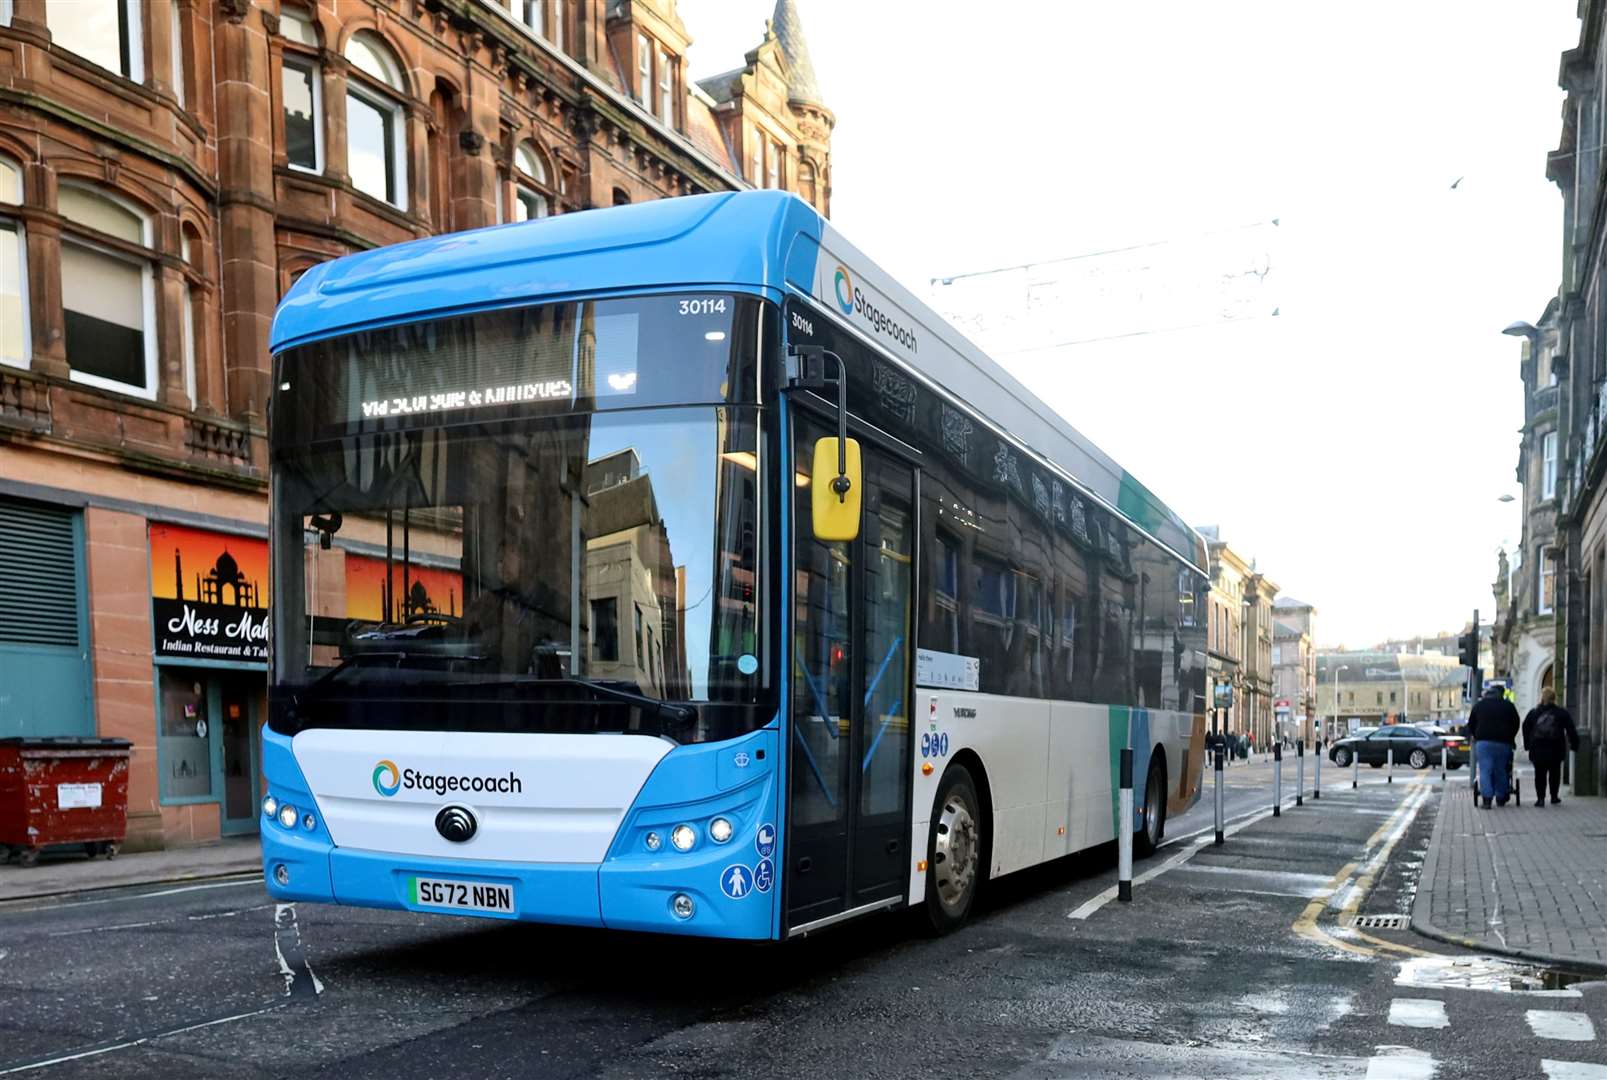 Free bus travel will be available for a week on routes in the Inverness area.